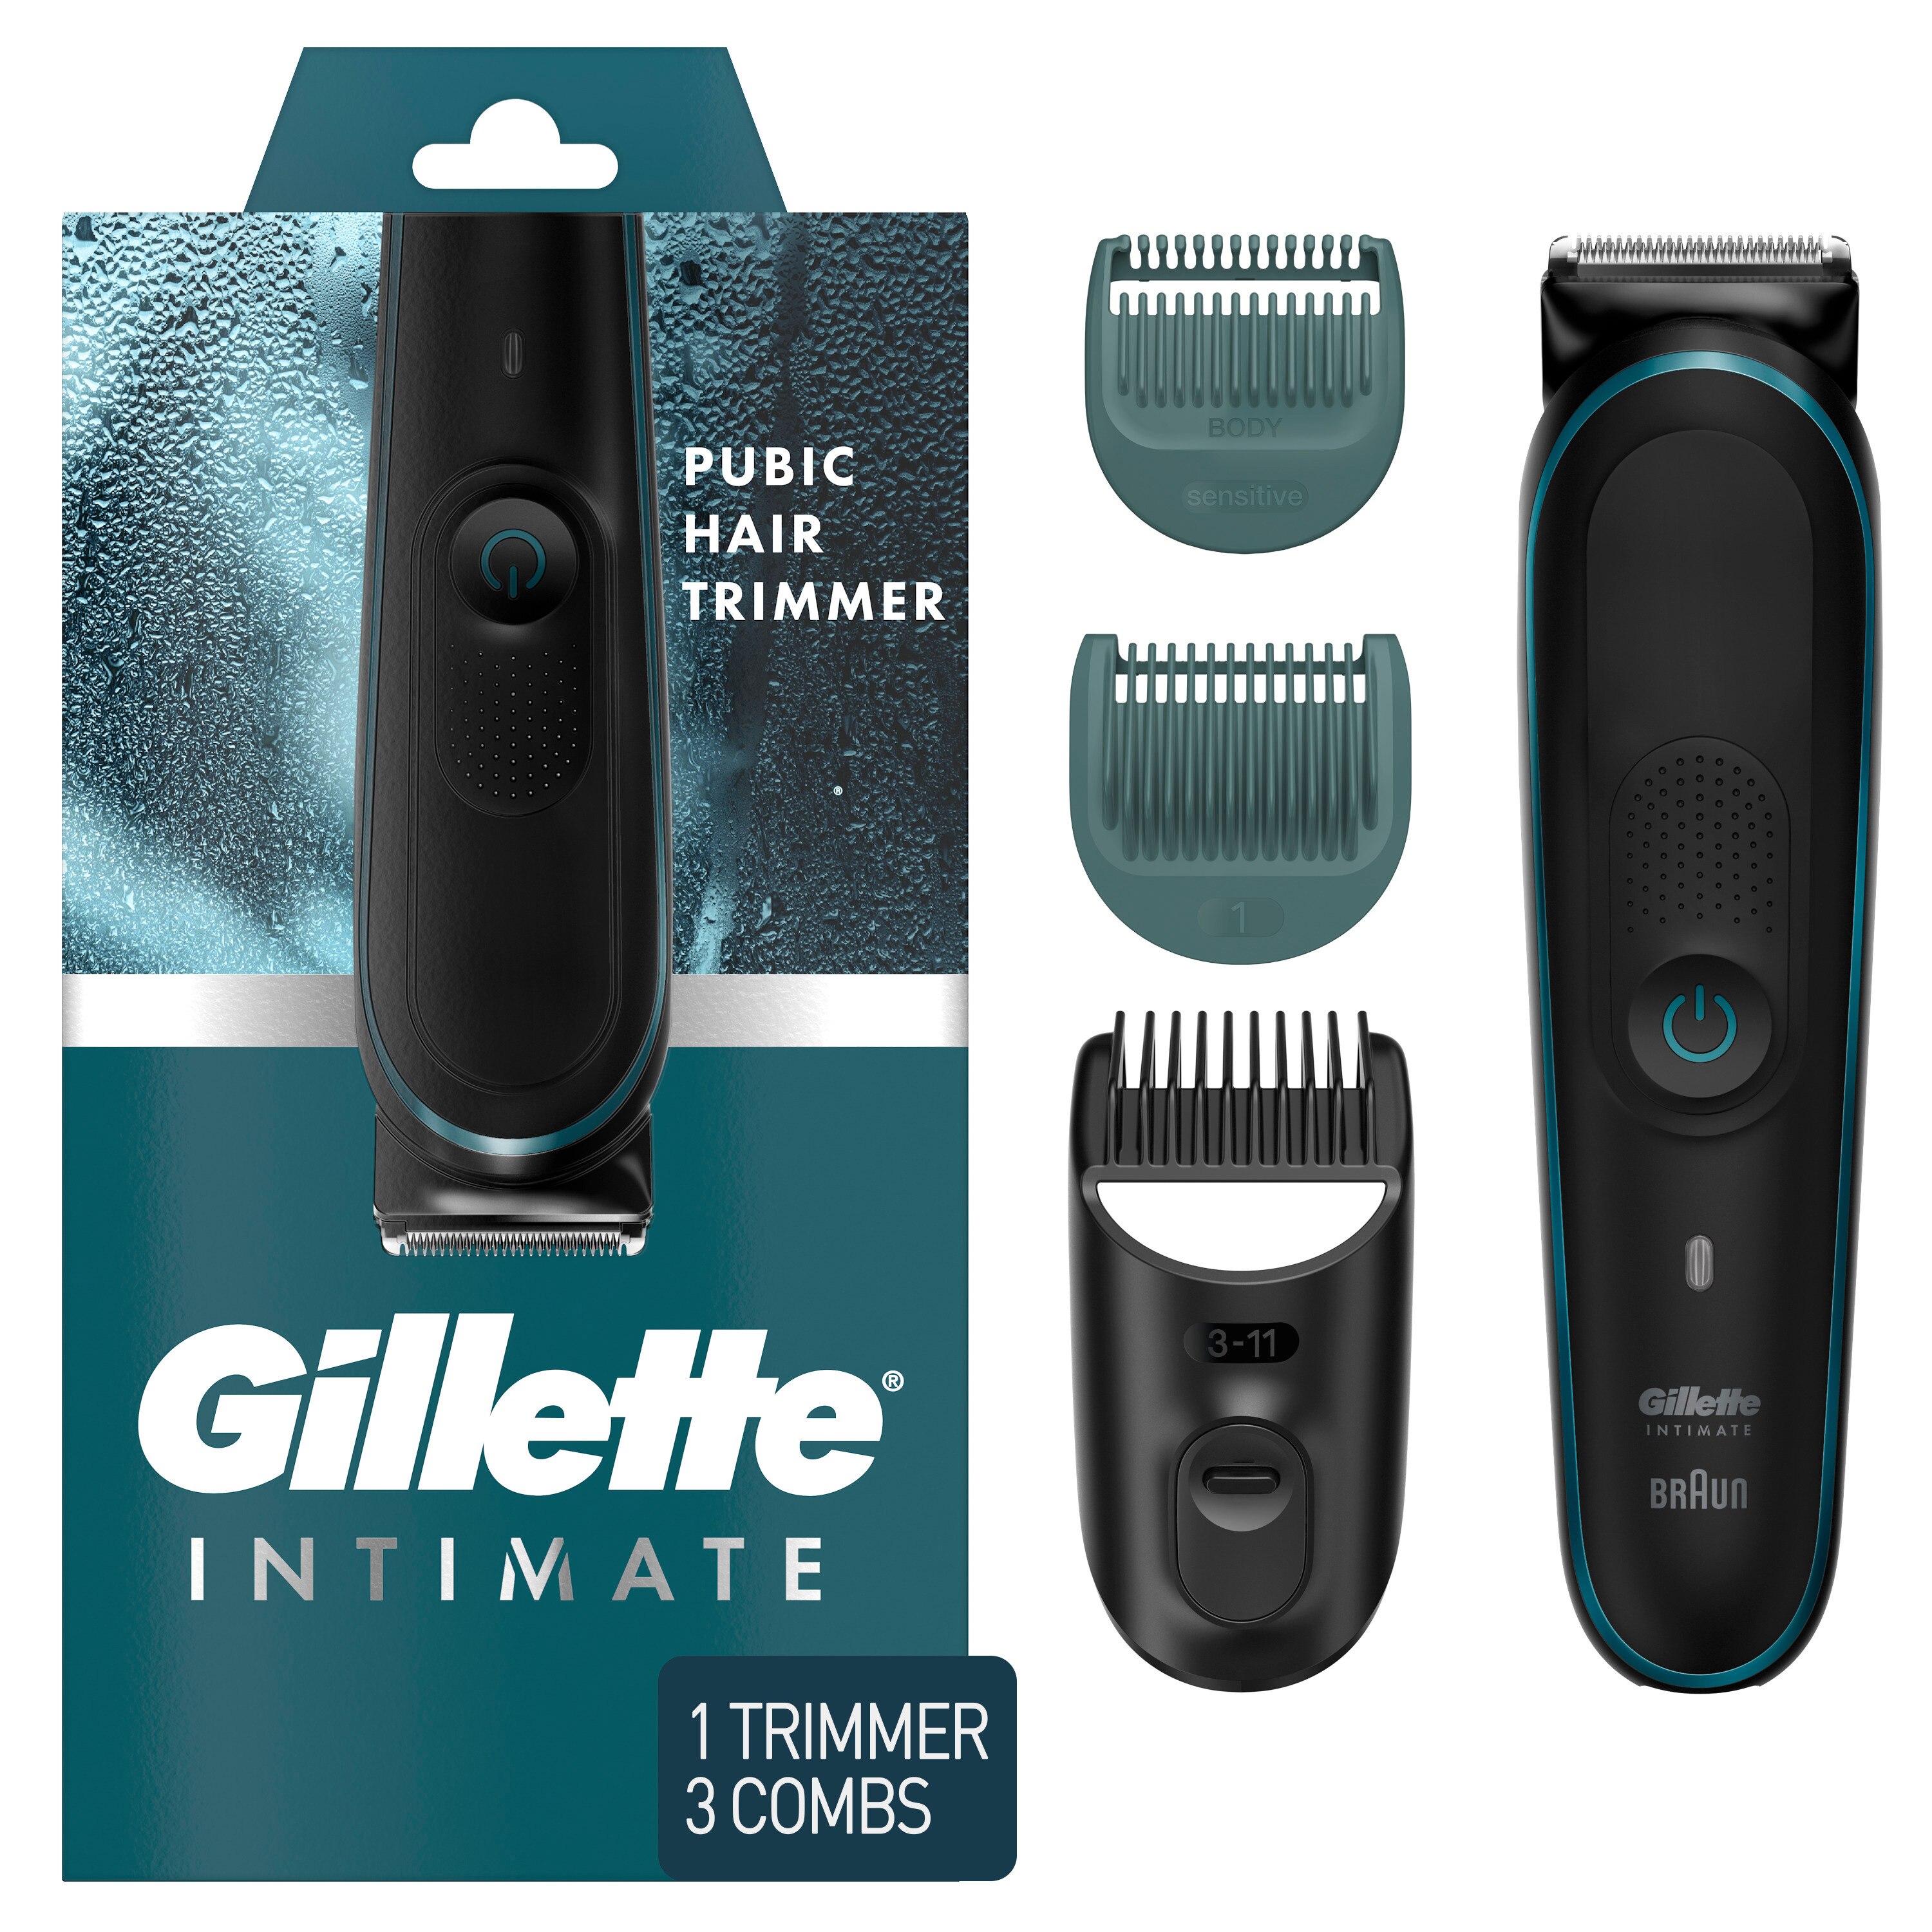 Gillette Intimate Waterproof Pubic Hair Trimmer | Pick Up In Store TODAY at CVS